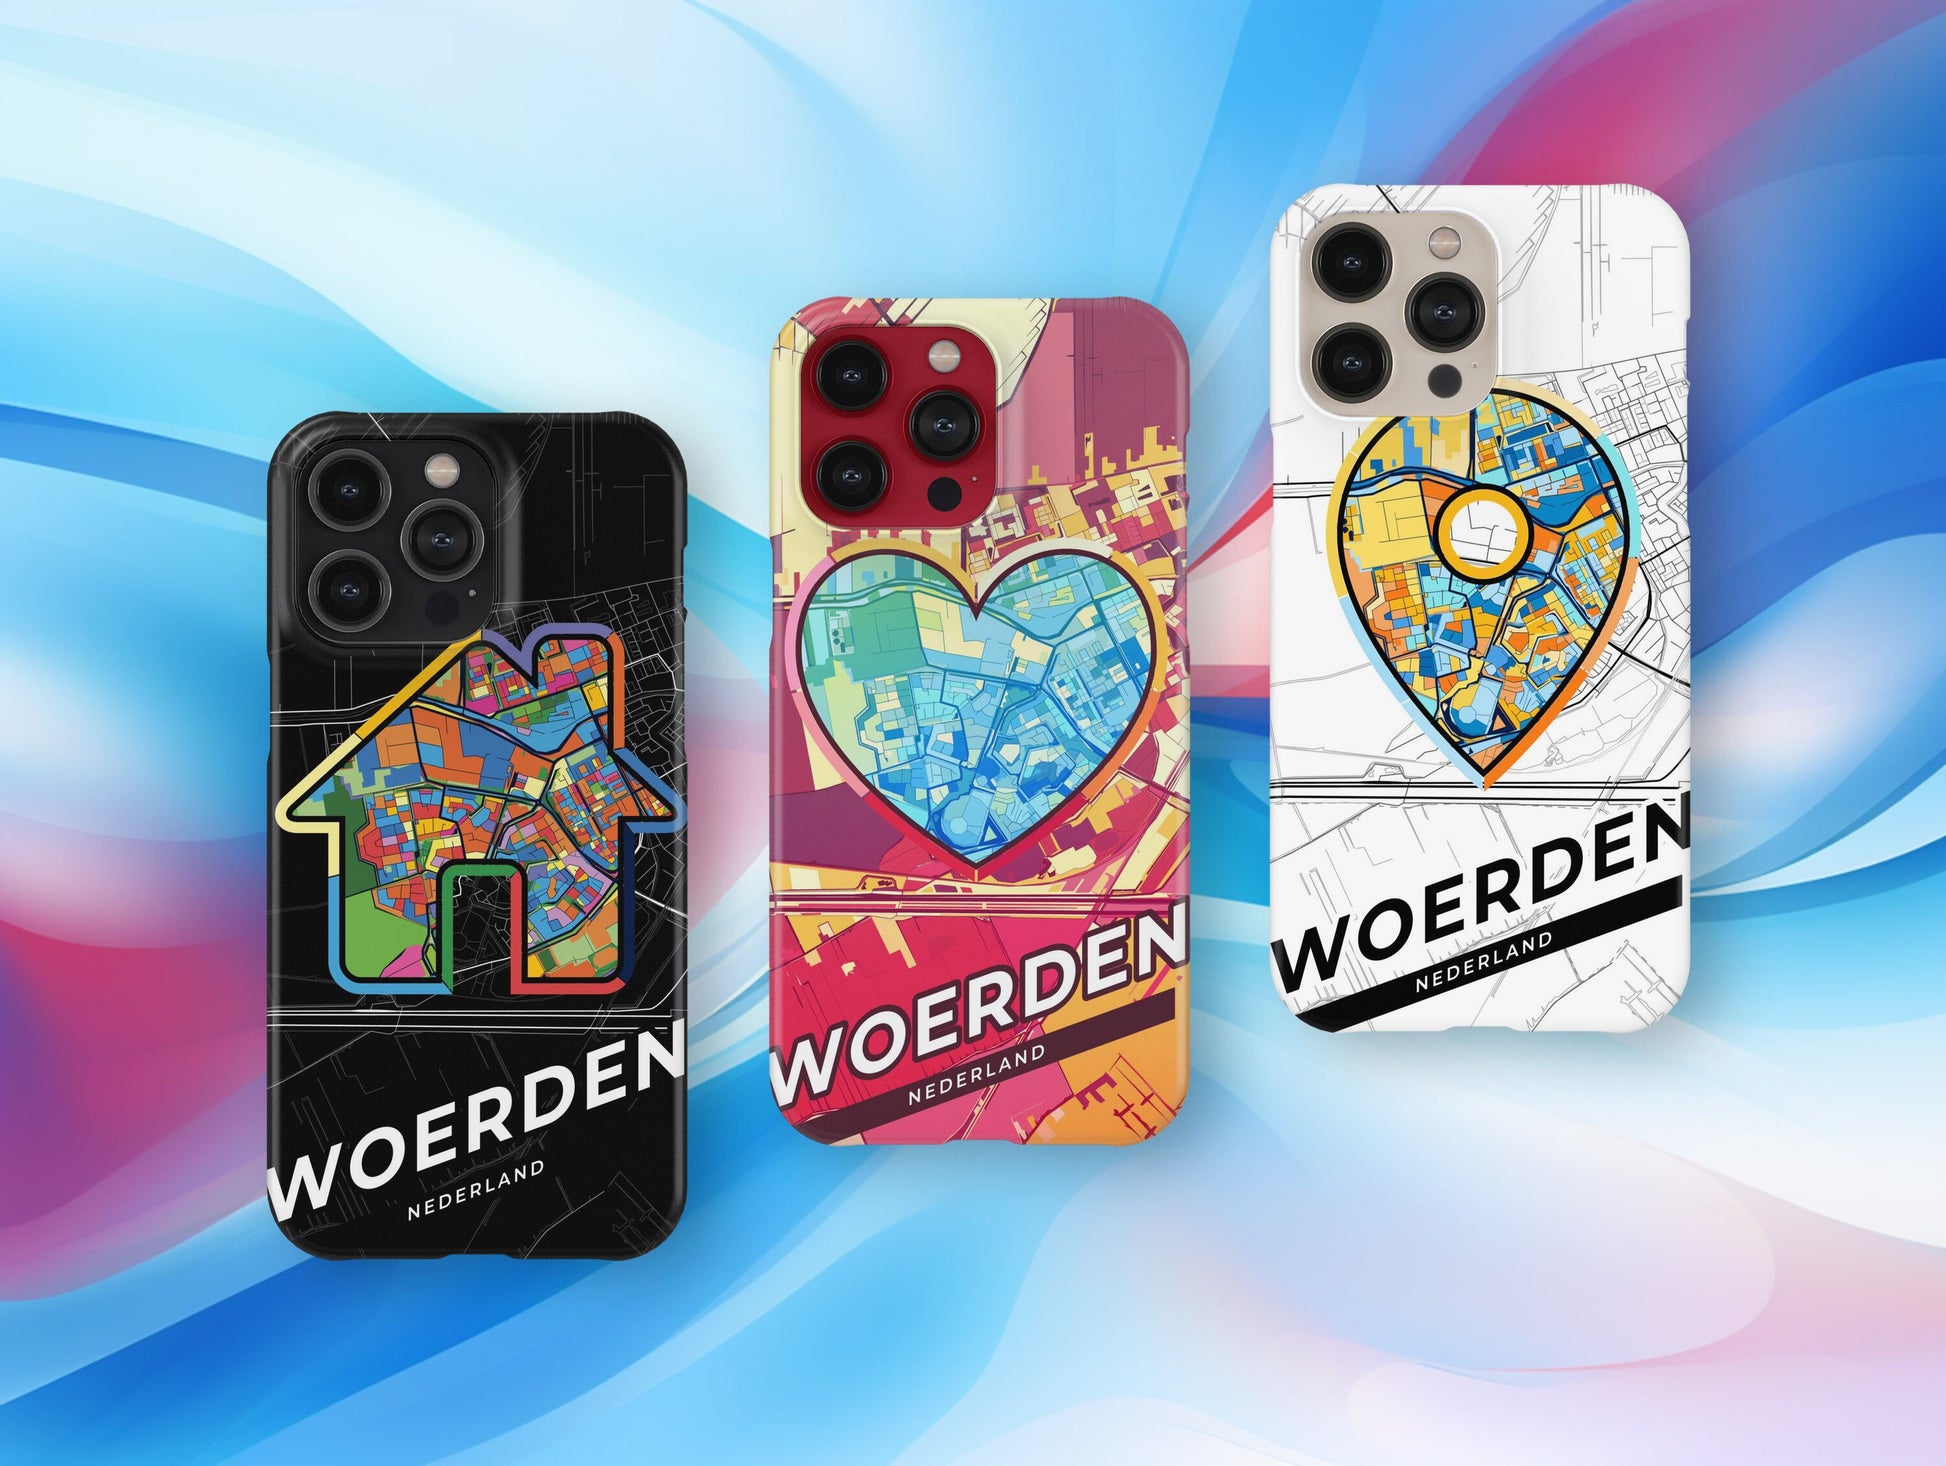 Woerden Netherlands slim phone case with colorful icon